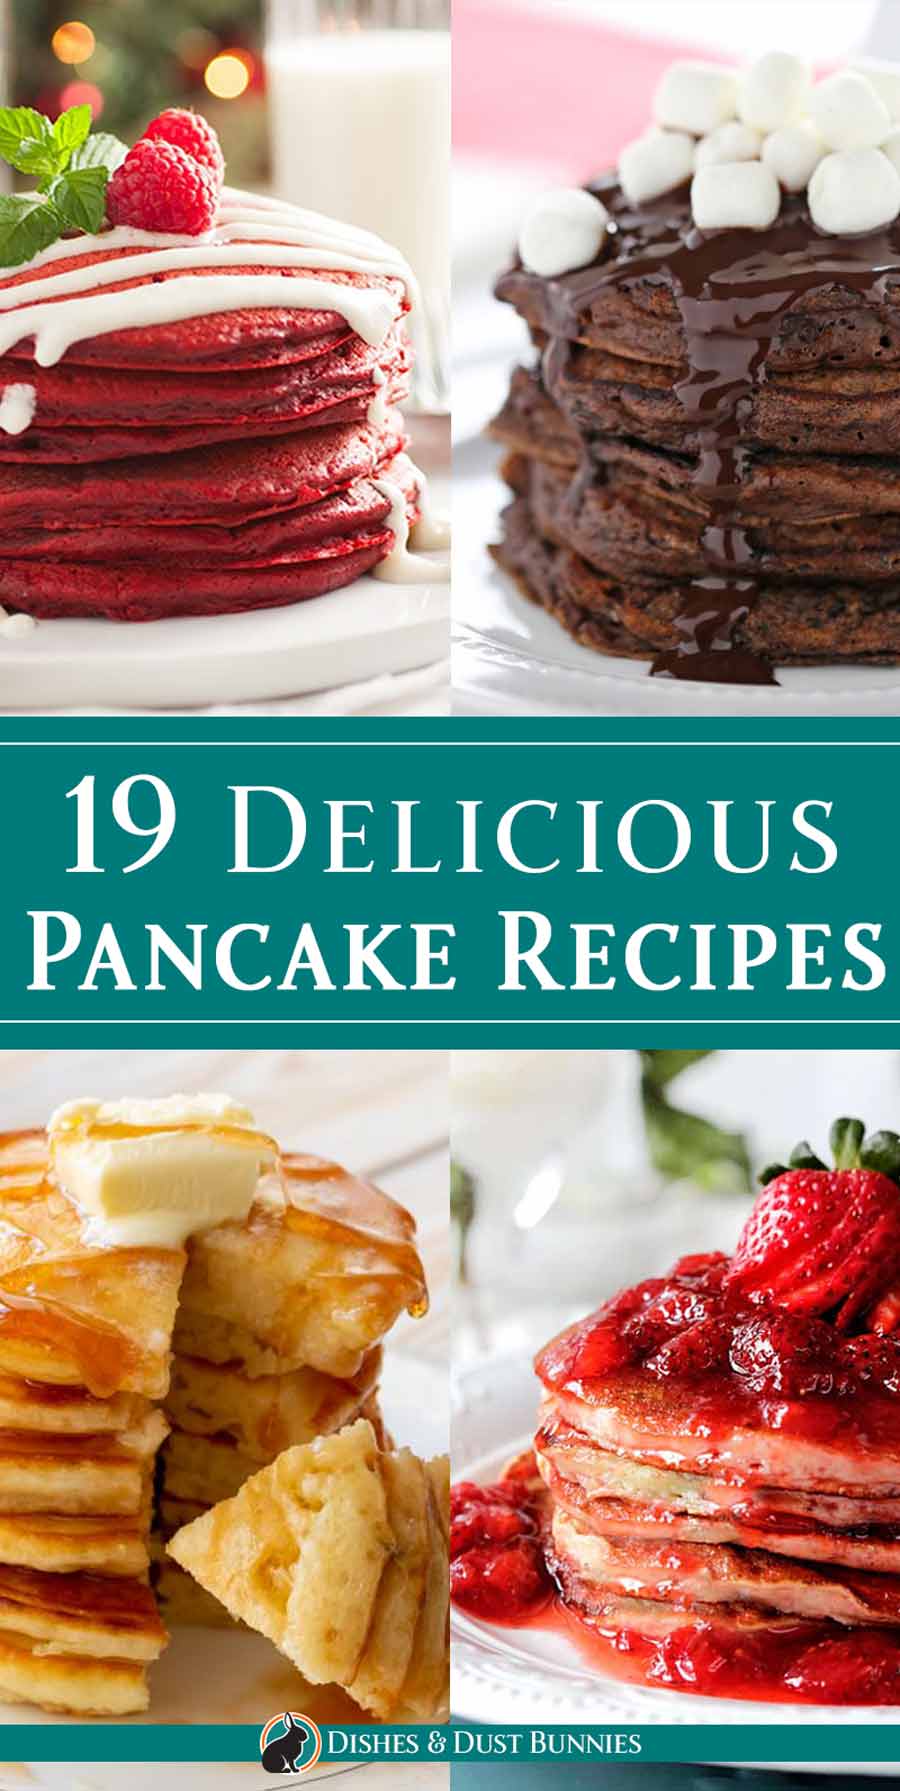 19 Delicious Pancake Recipes Dishes & Dust Bunnies